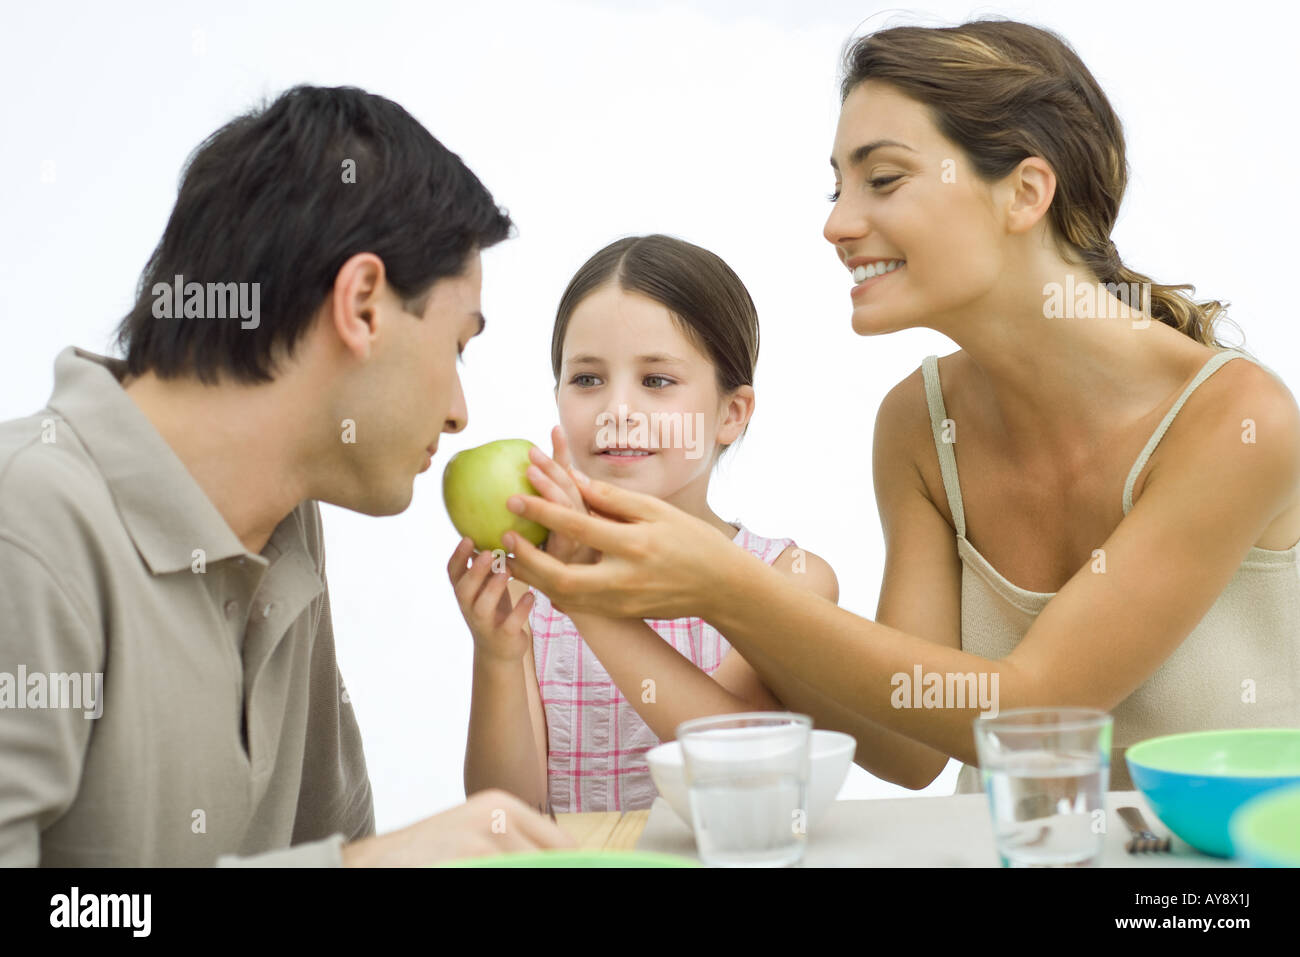 Family of healthy eaters, mother and daughter holding apple toward father Stock Photo